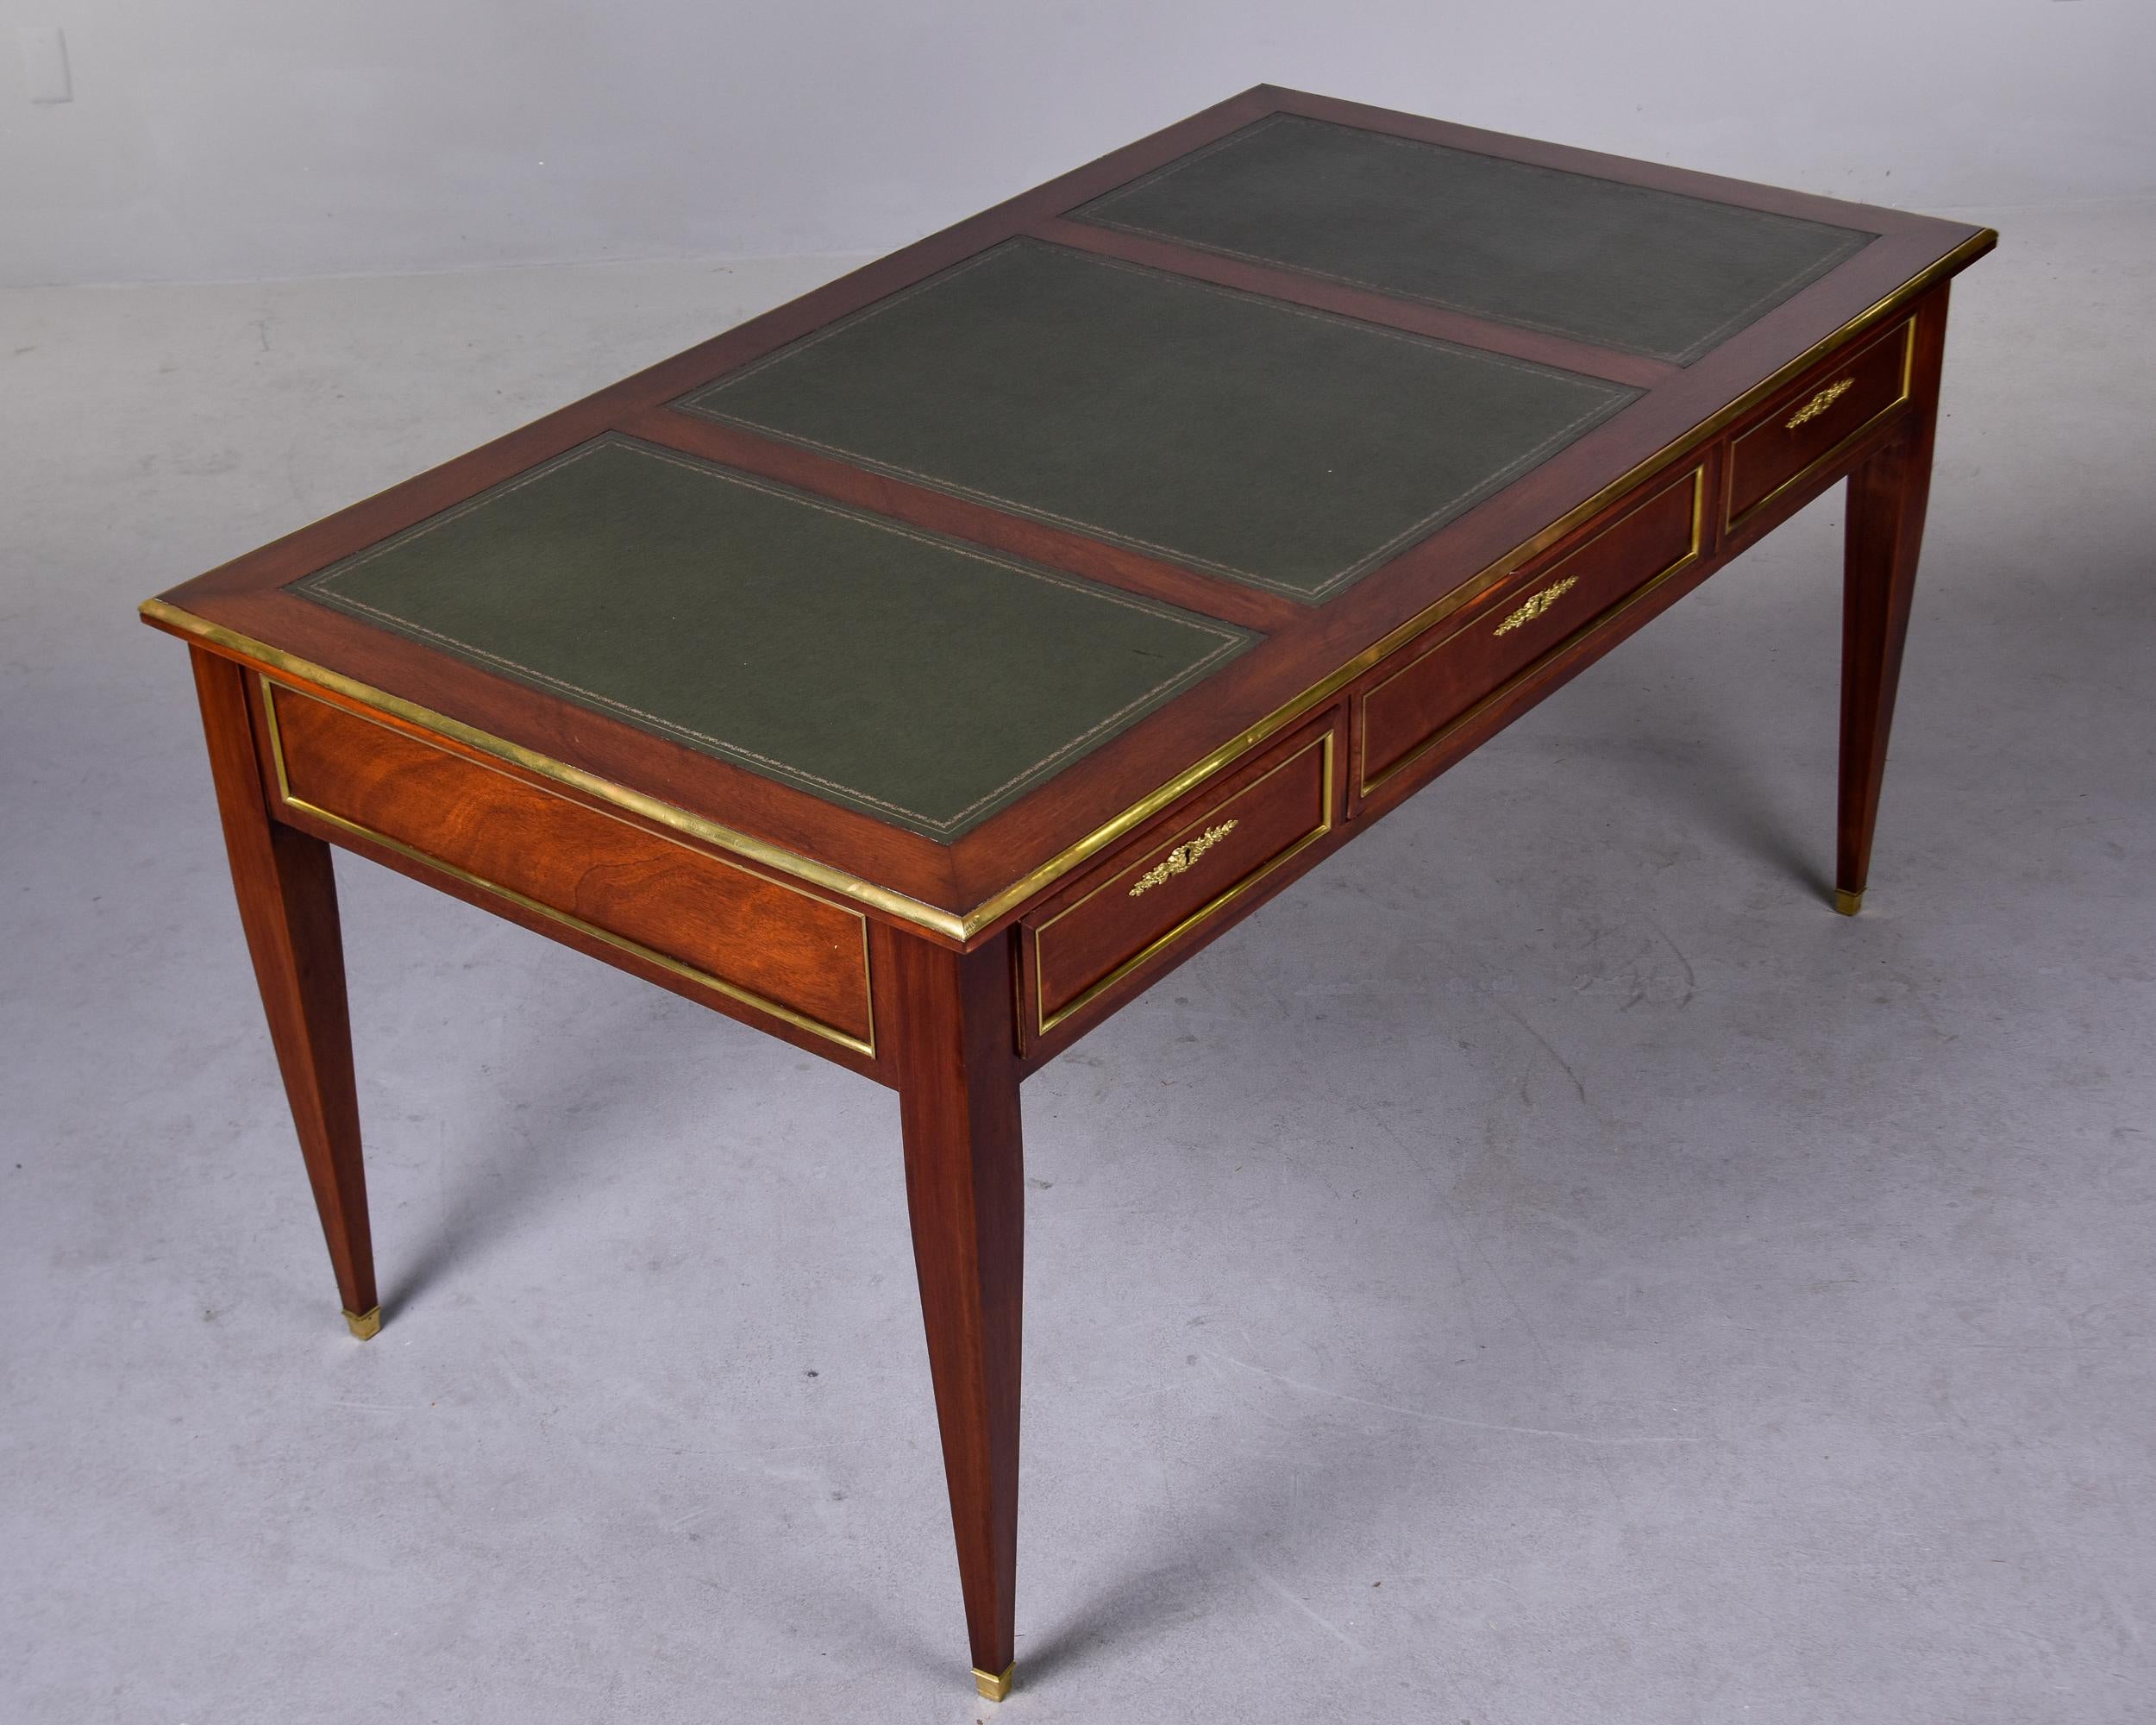 Early 19th Century Louis XVI Style Large Mahogany Desk with Green Leather Top For Sale 9